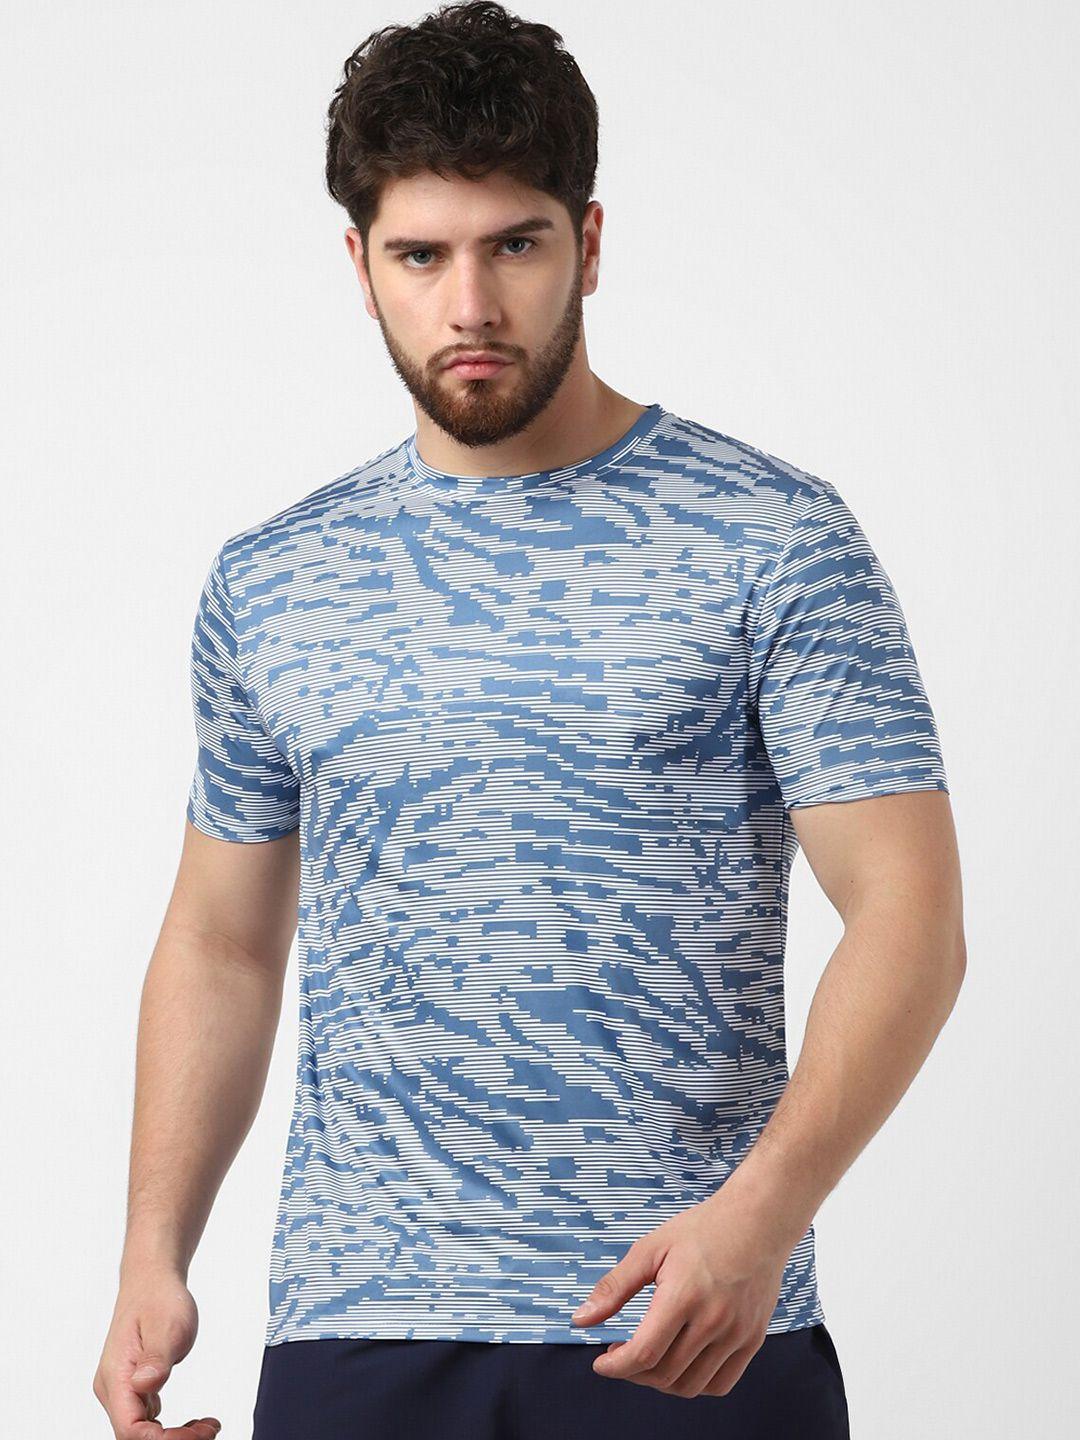 urbanmark abstract printed round neck regular fit t-shirts